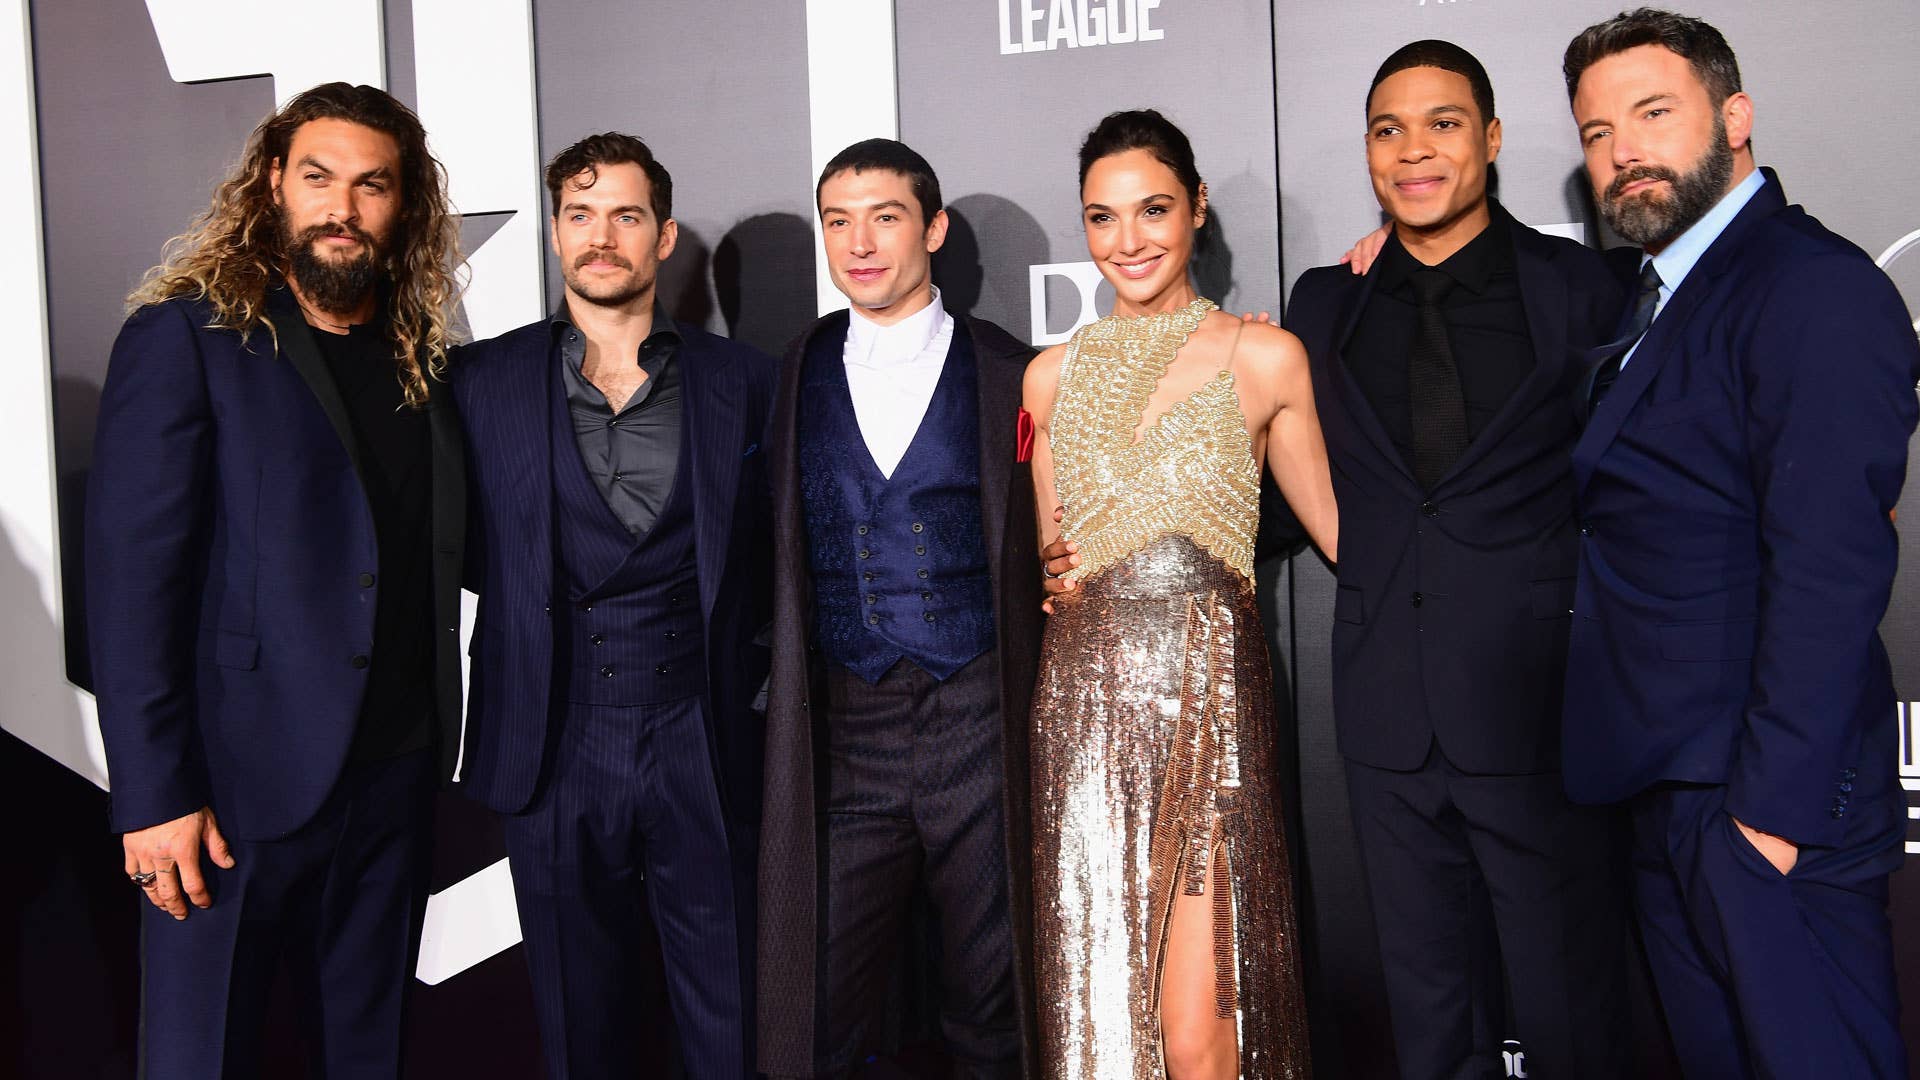 The cast of 'Justice League' lines up for photos on the red carpet.